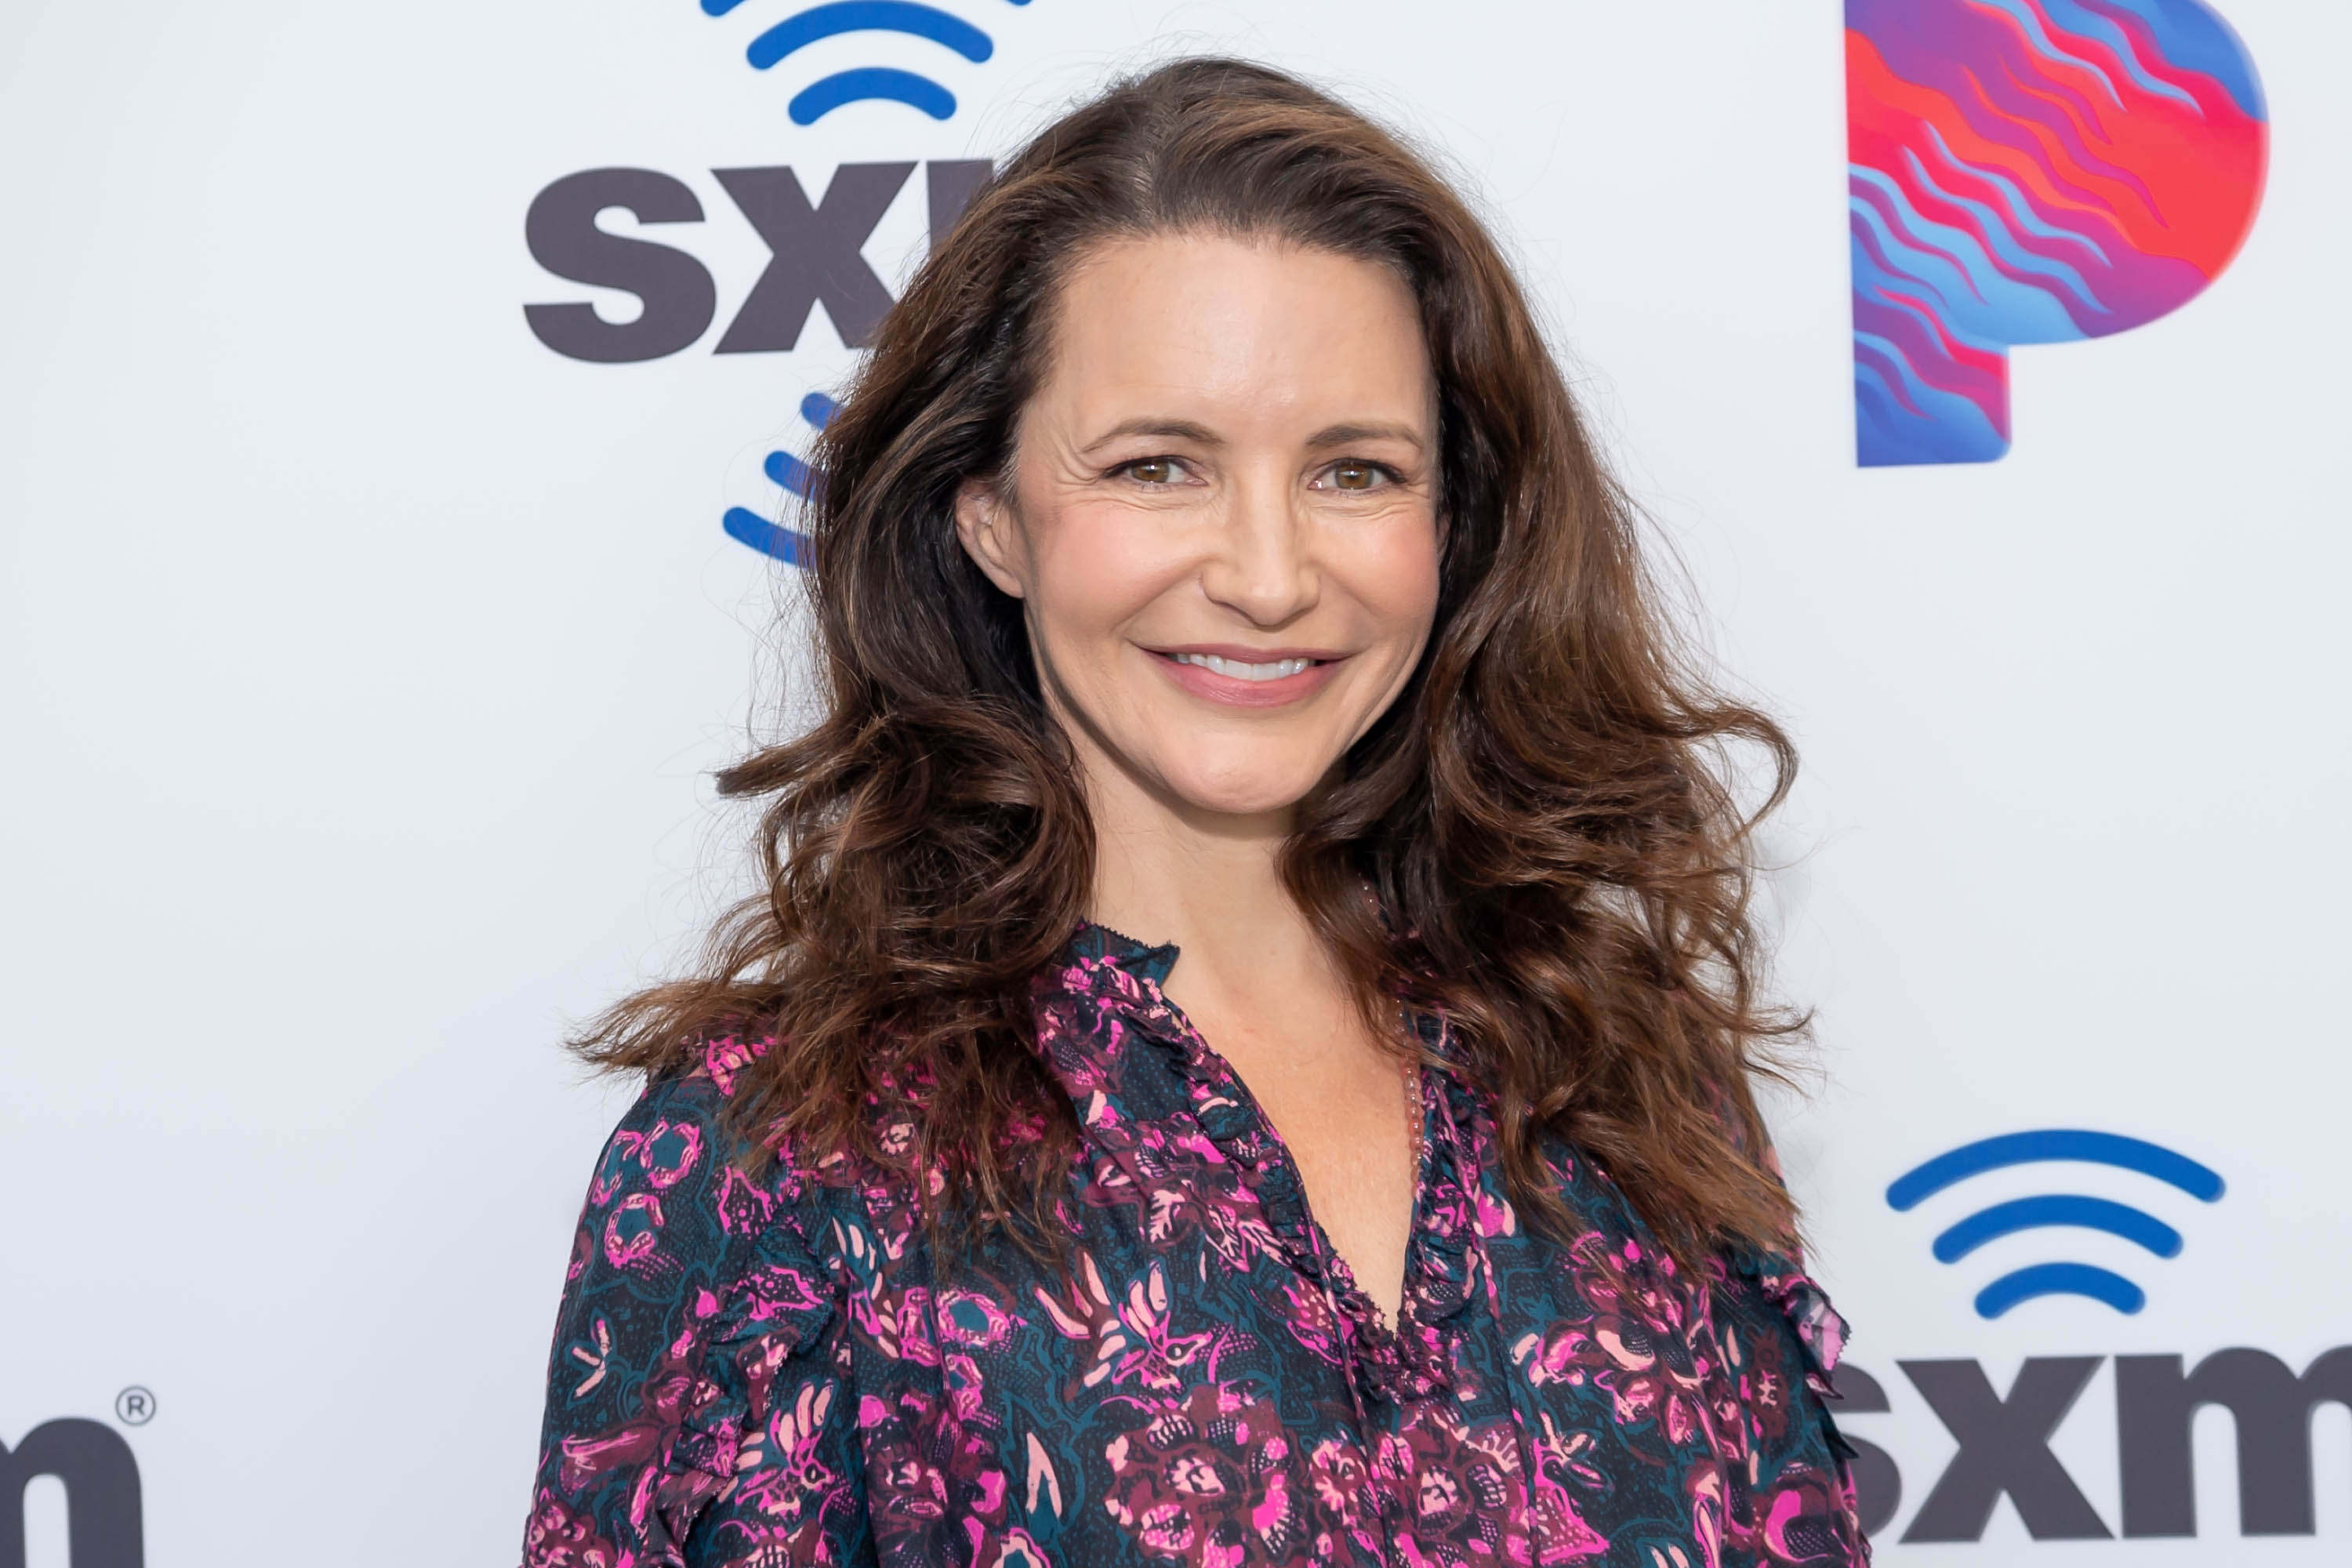 Kristin Davis attends "Celebrities Visit the SiriusXM Hollywood Studios" in Los Angeles' at SiriusXM Studios on November 1, 2019 in Los Angeles, California. | Source: Getty Images